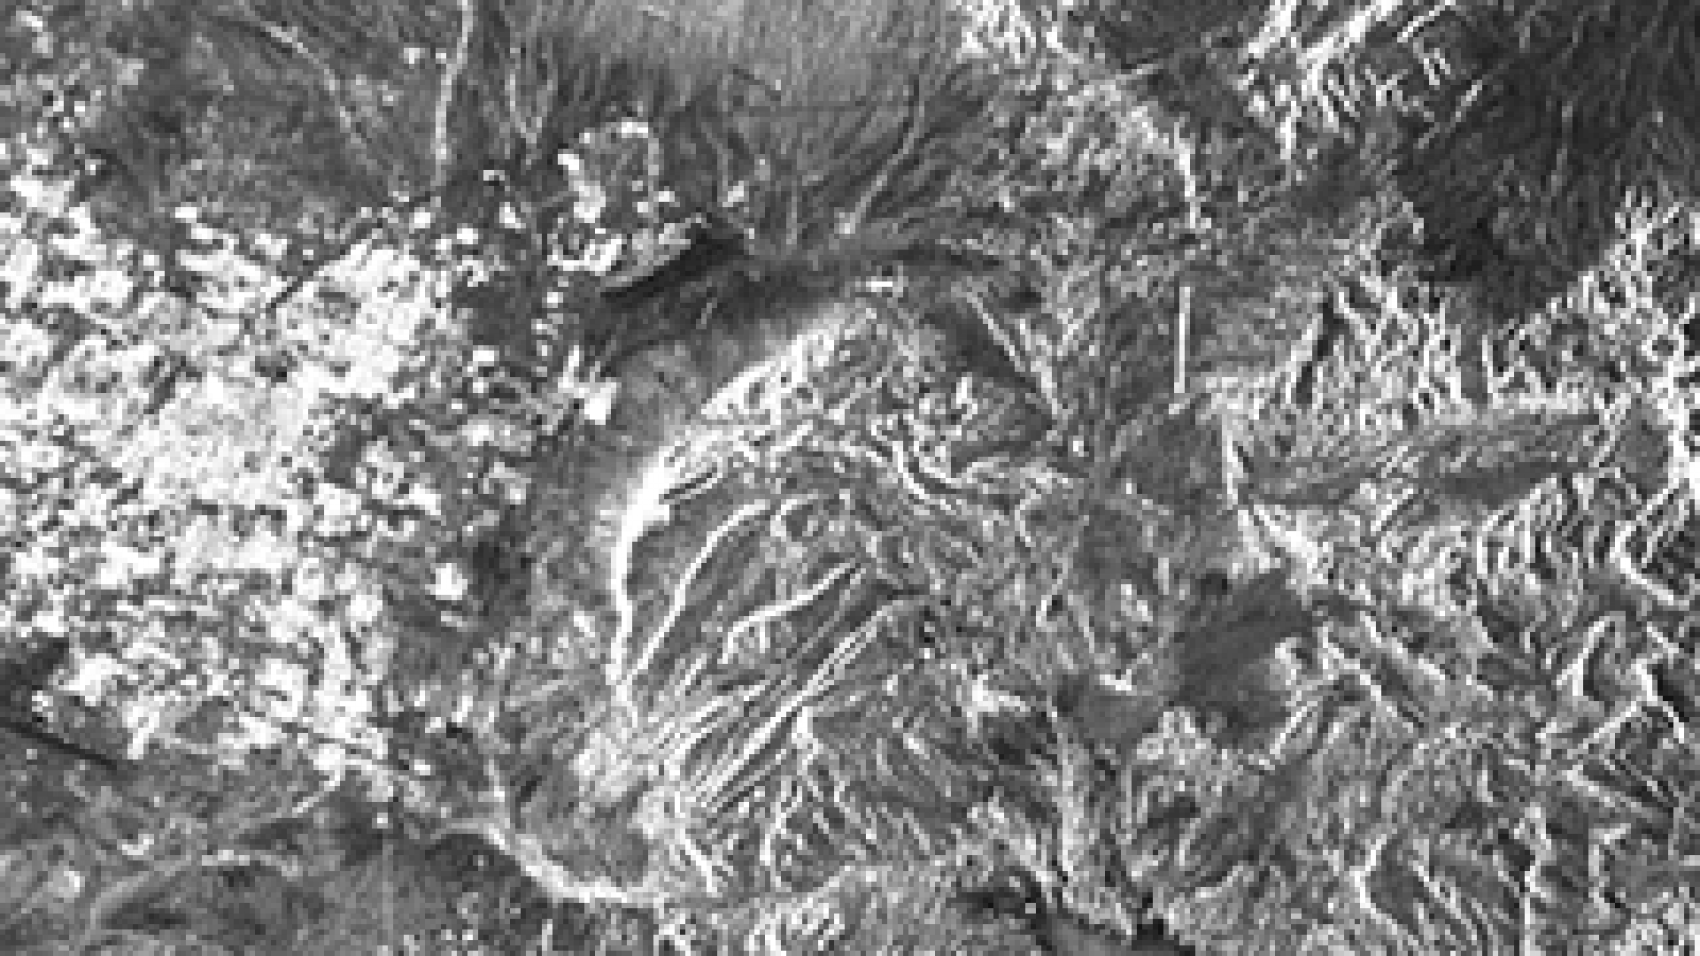 Las Vegas is on the left in this detail of the Seasat sample granule provided with this recipe. Credit: NASA 1978, processed by ASF DAAC 2013.